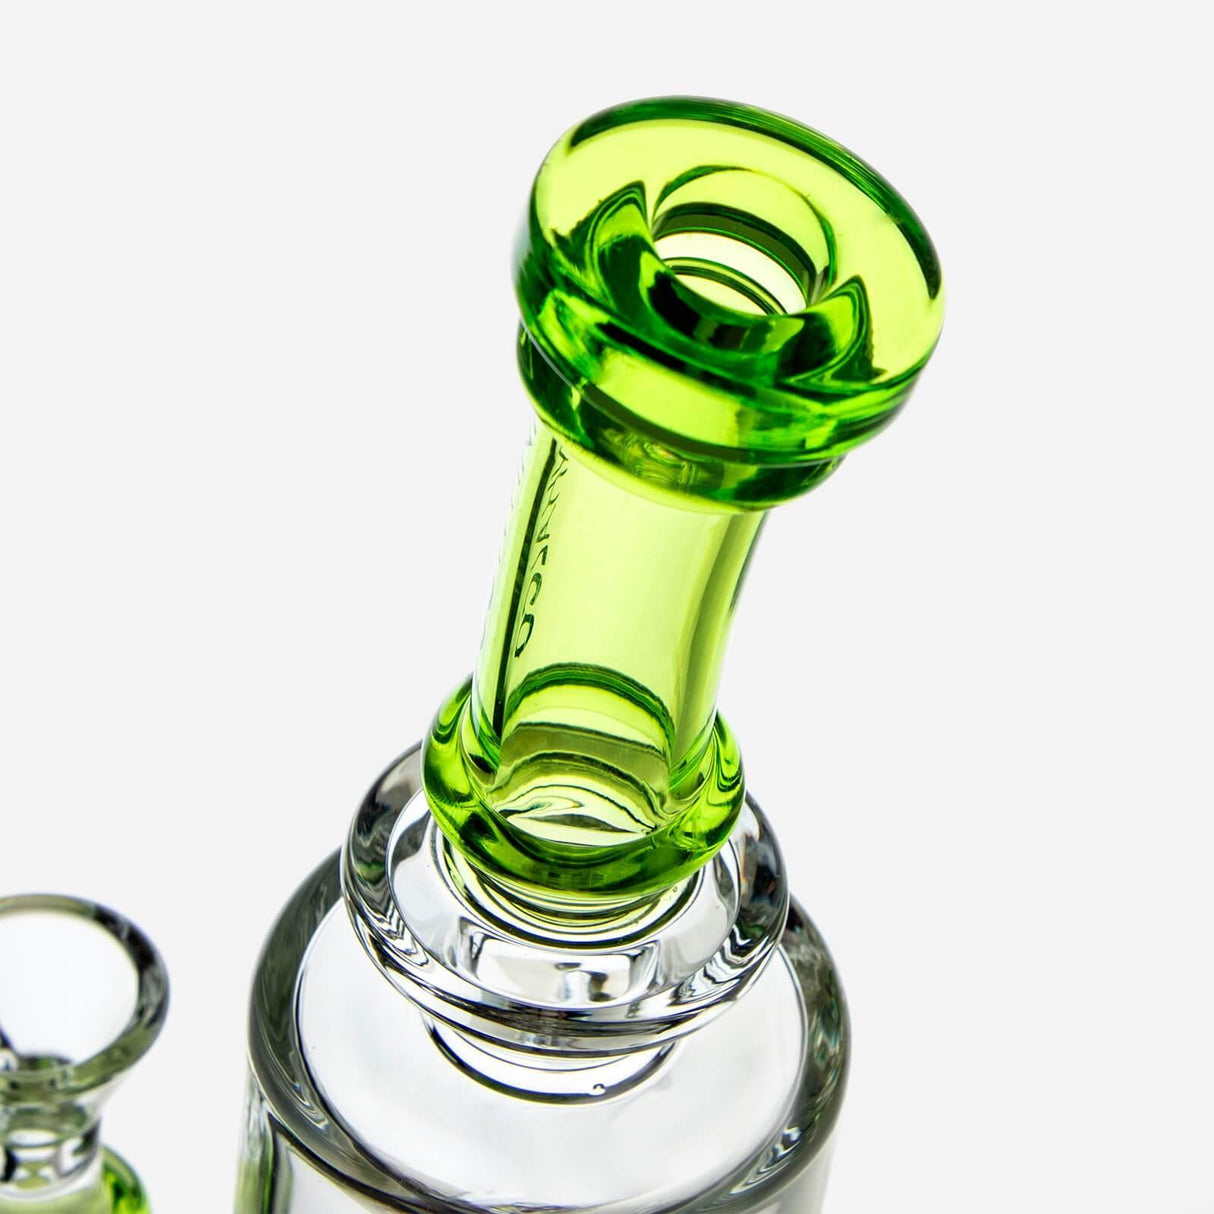 PILOTDIARY DNA Bong close-up view highlighting the vibrant green glass bowl